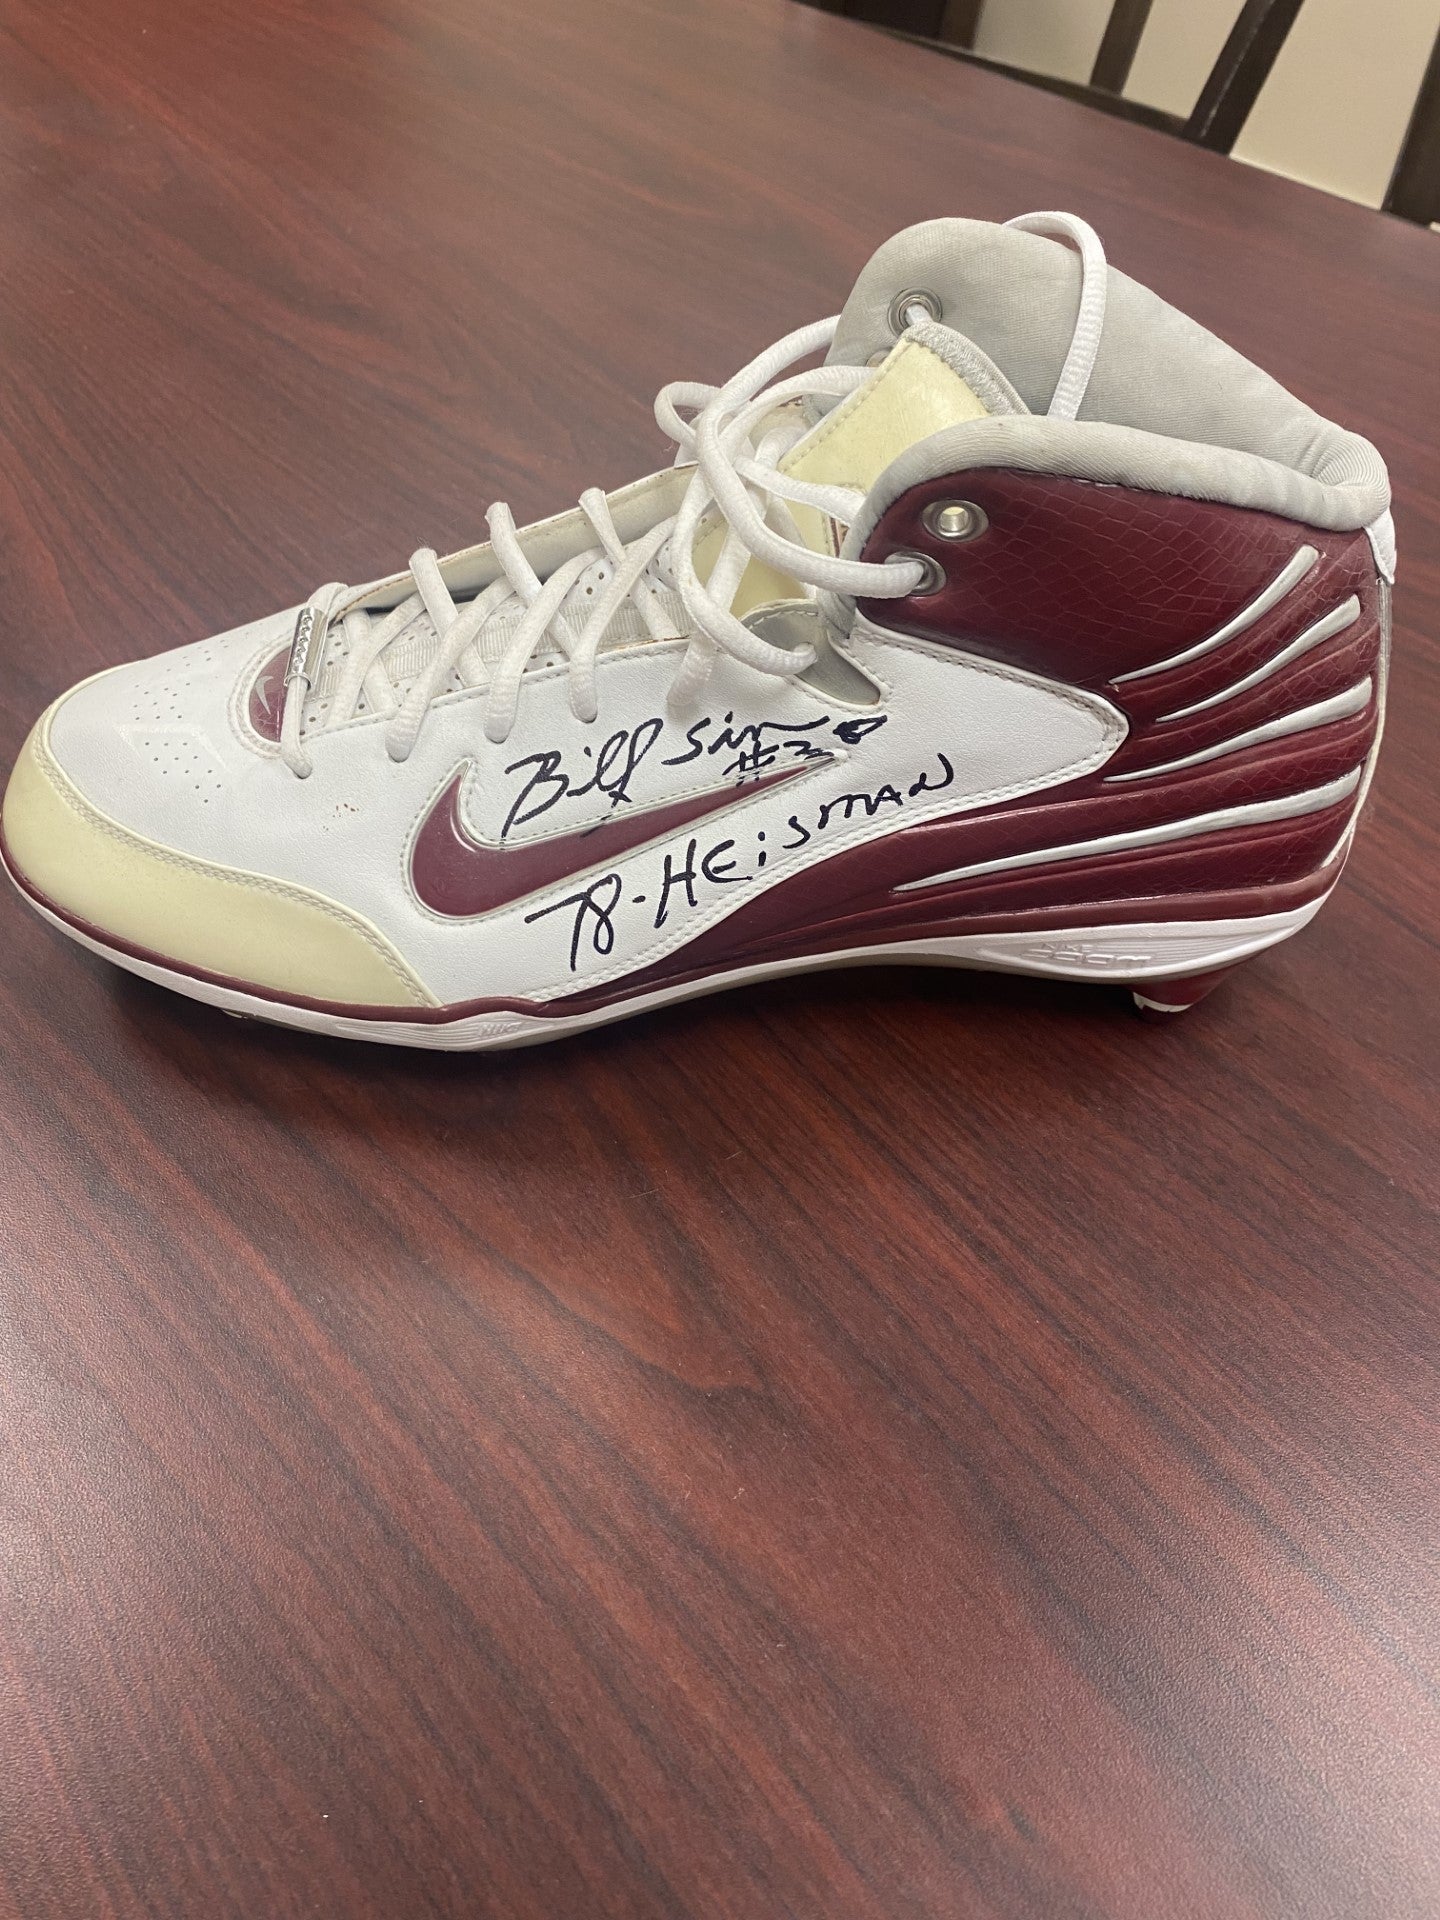 Billy Sims Autograph Nike Cleat